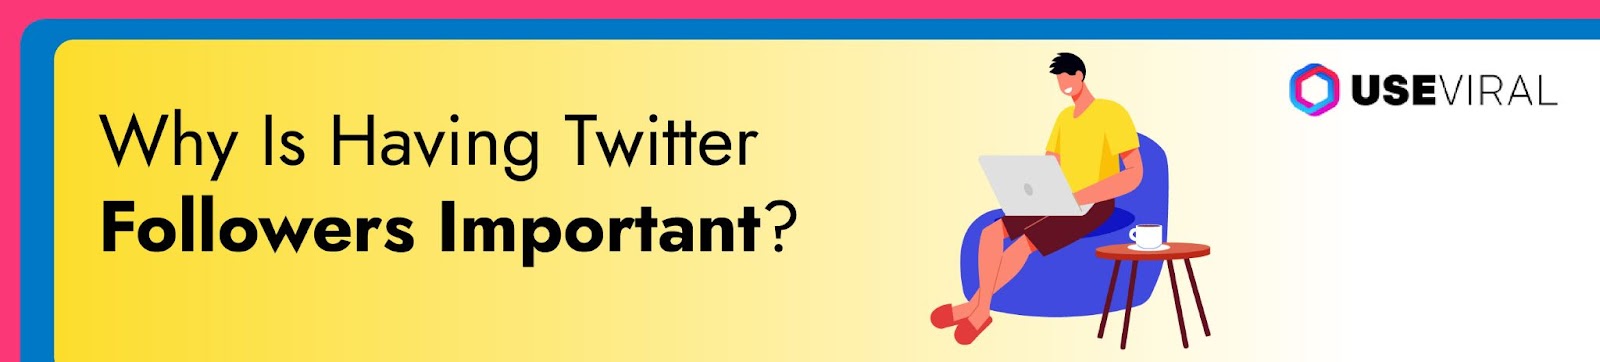 Why Is Having Twitter Followers in Important?